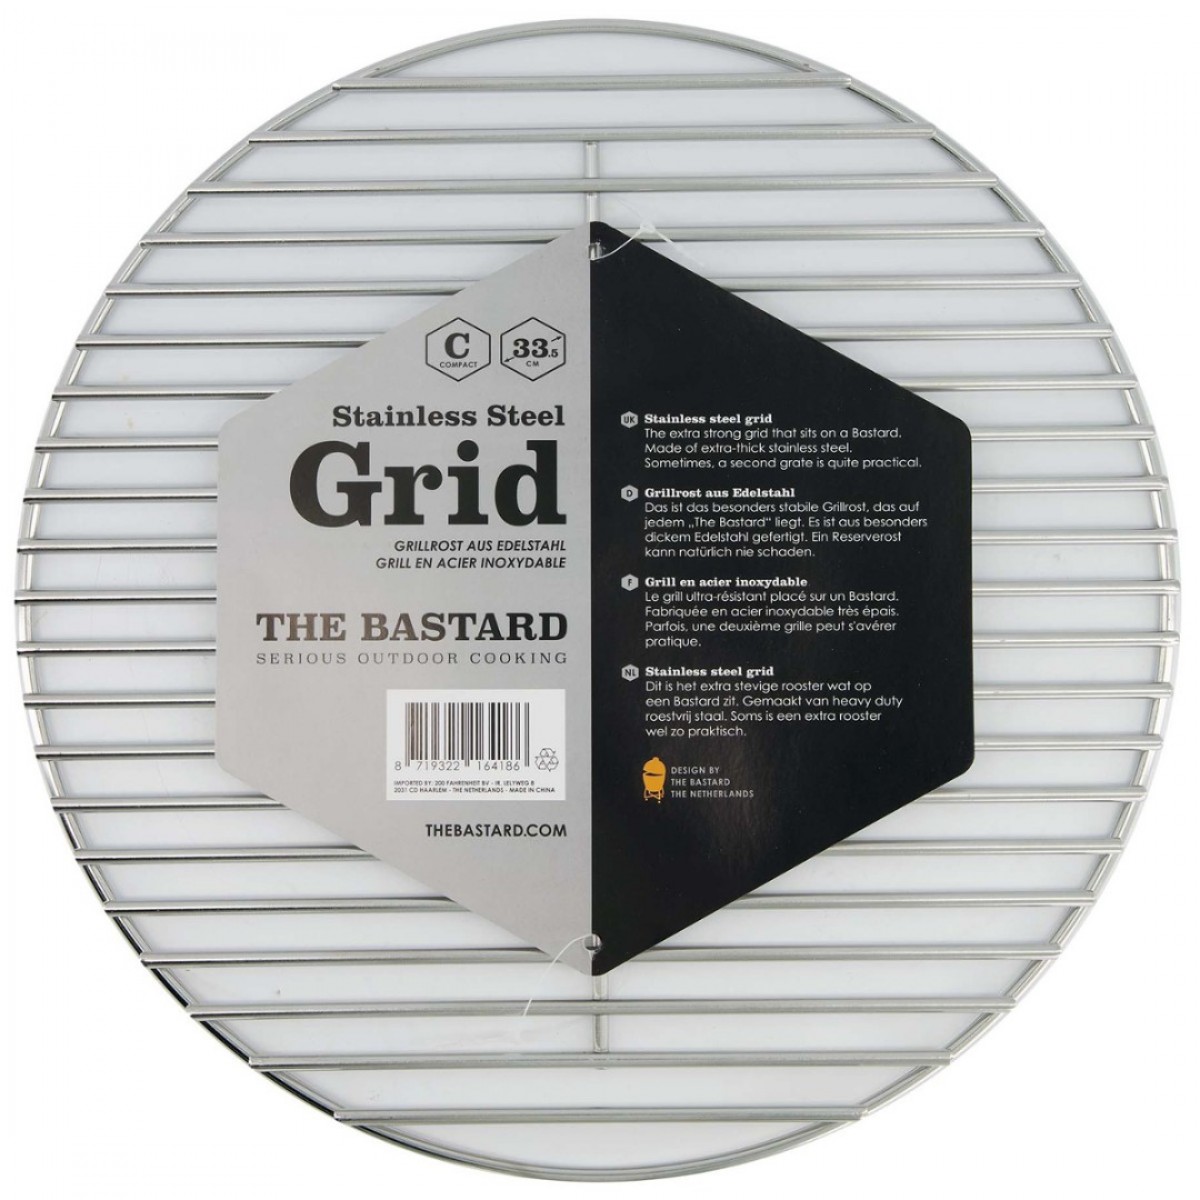 The Bastard BB416 Stainless Steel Grid Compact 34cm